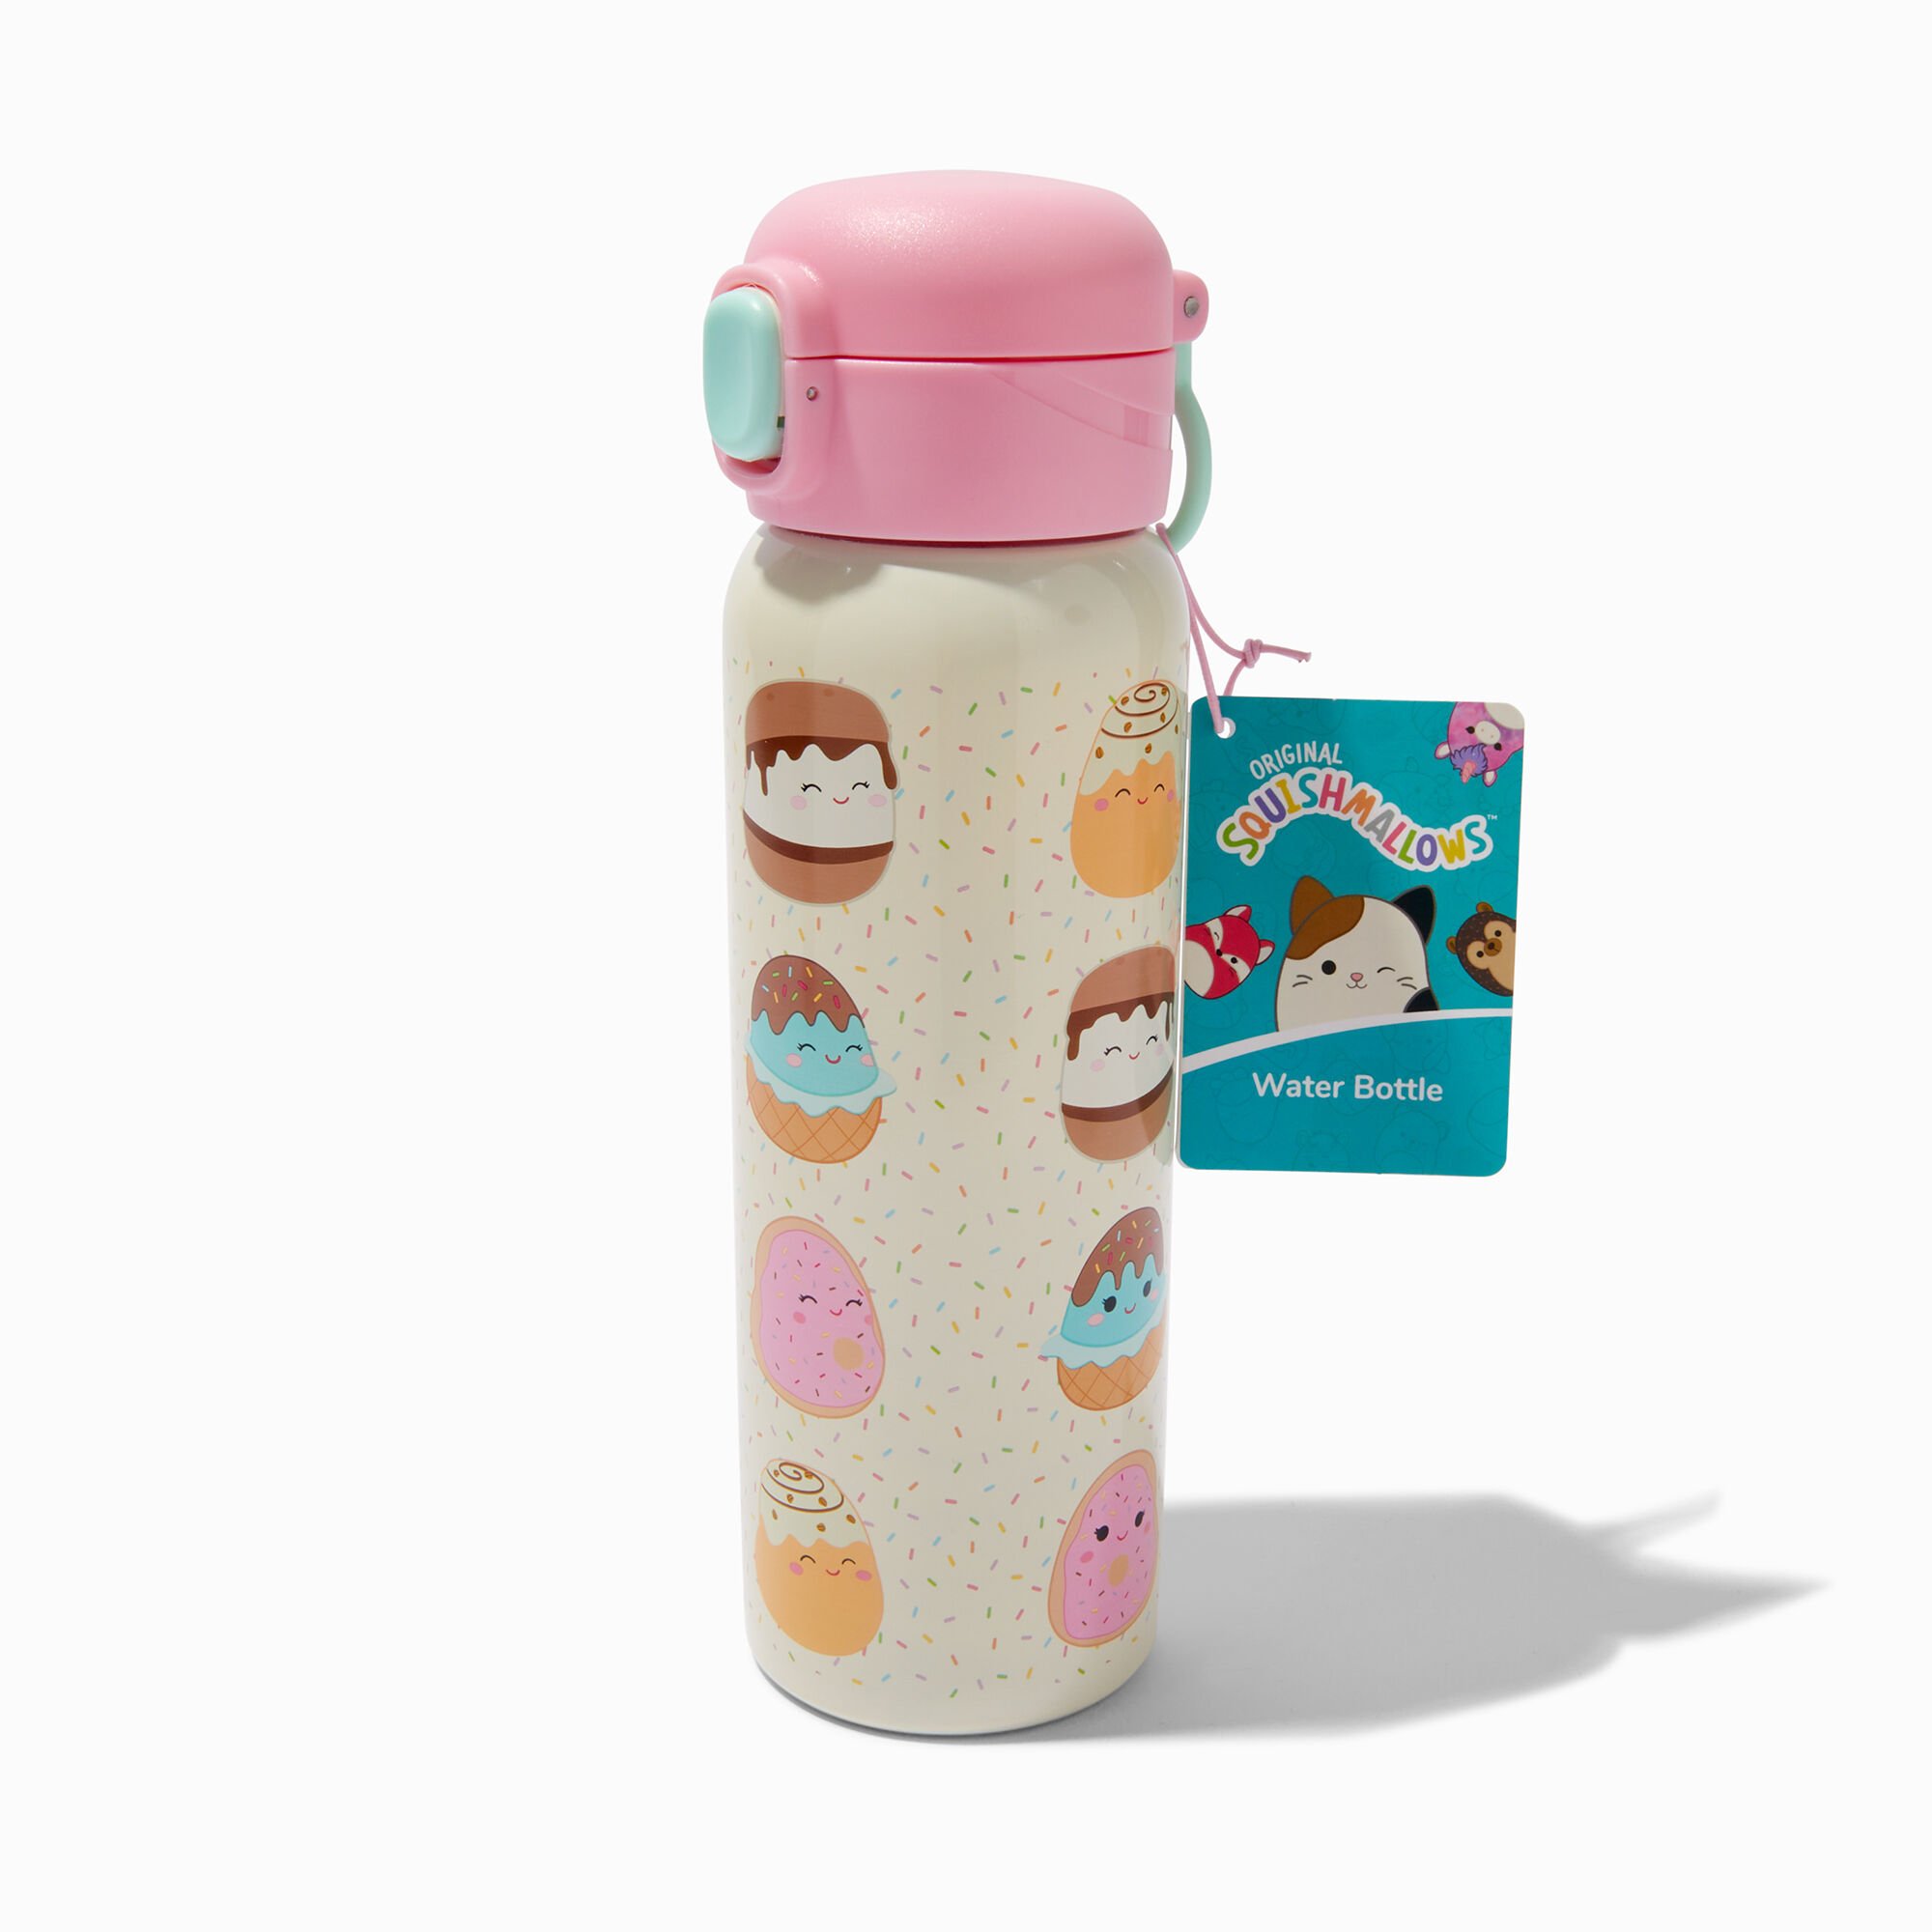 View Claires Squishmallows Sprinkles Water Bottle information